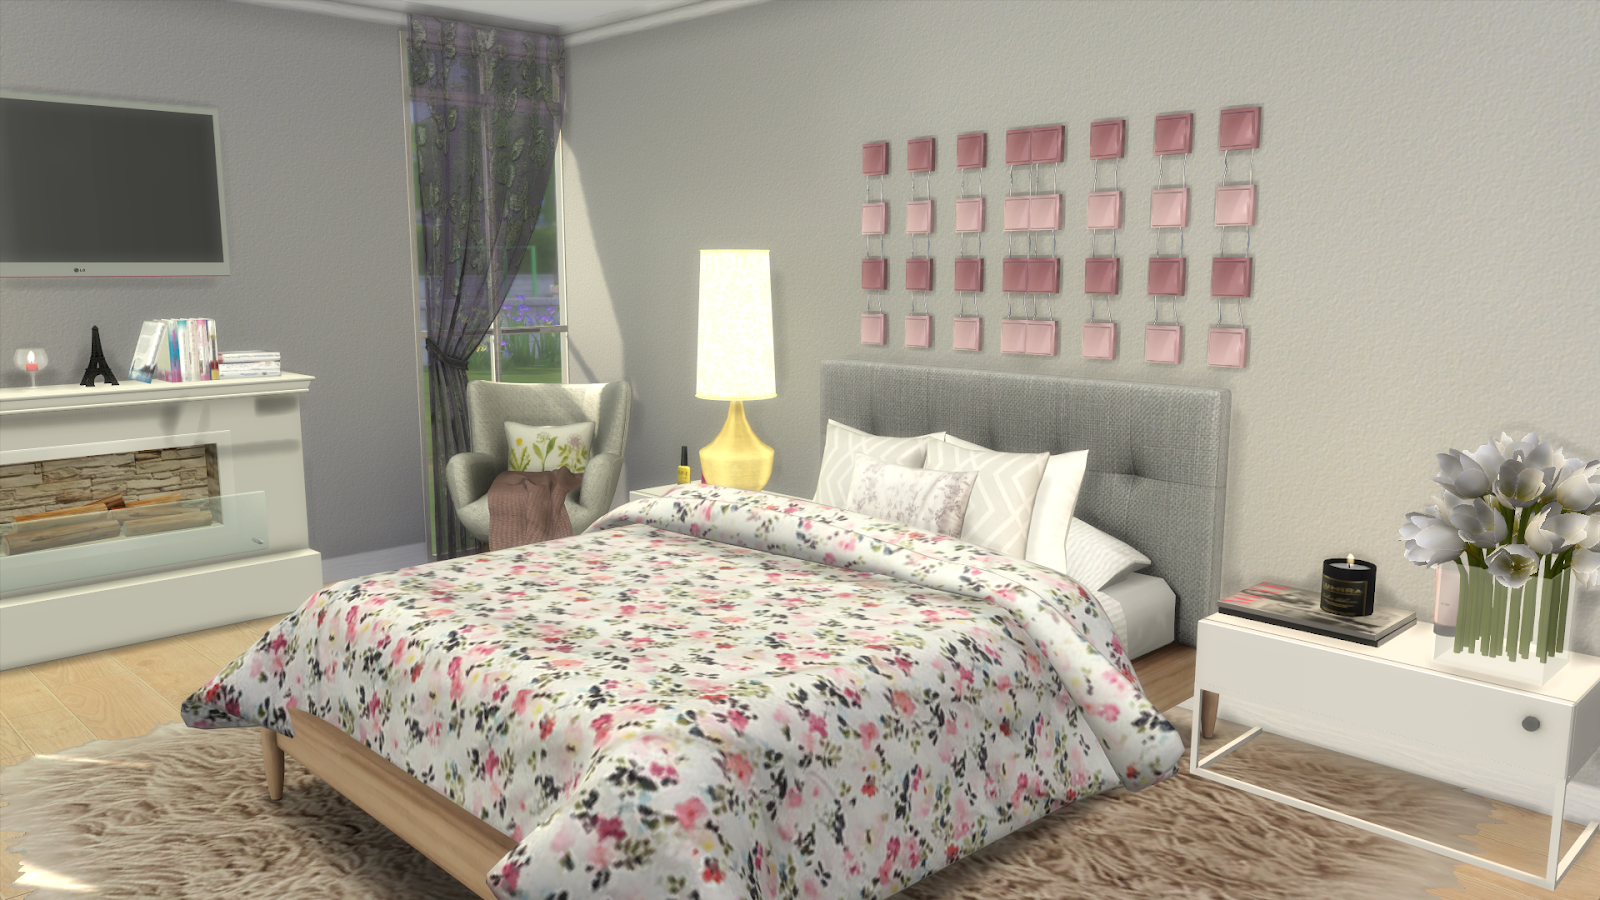 Sims 4 cc free download - paymentpole